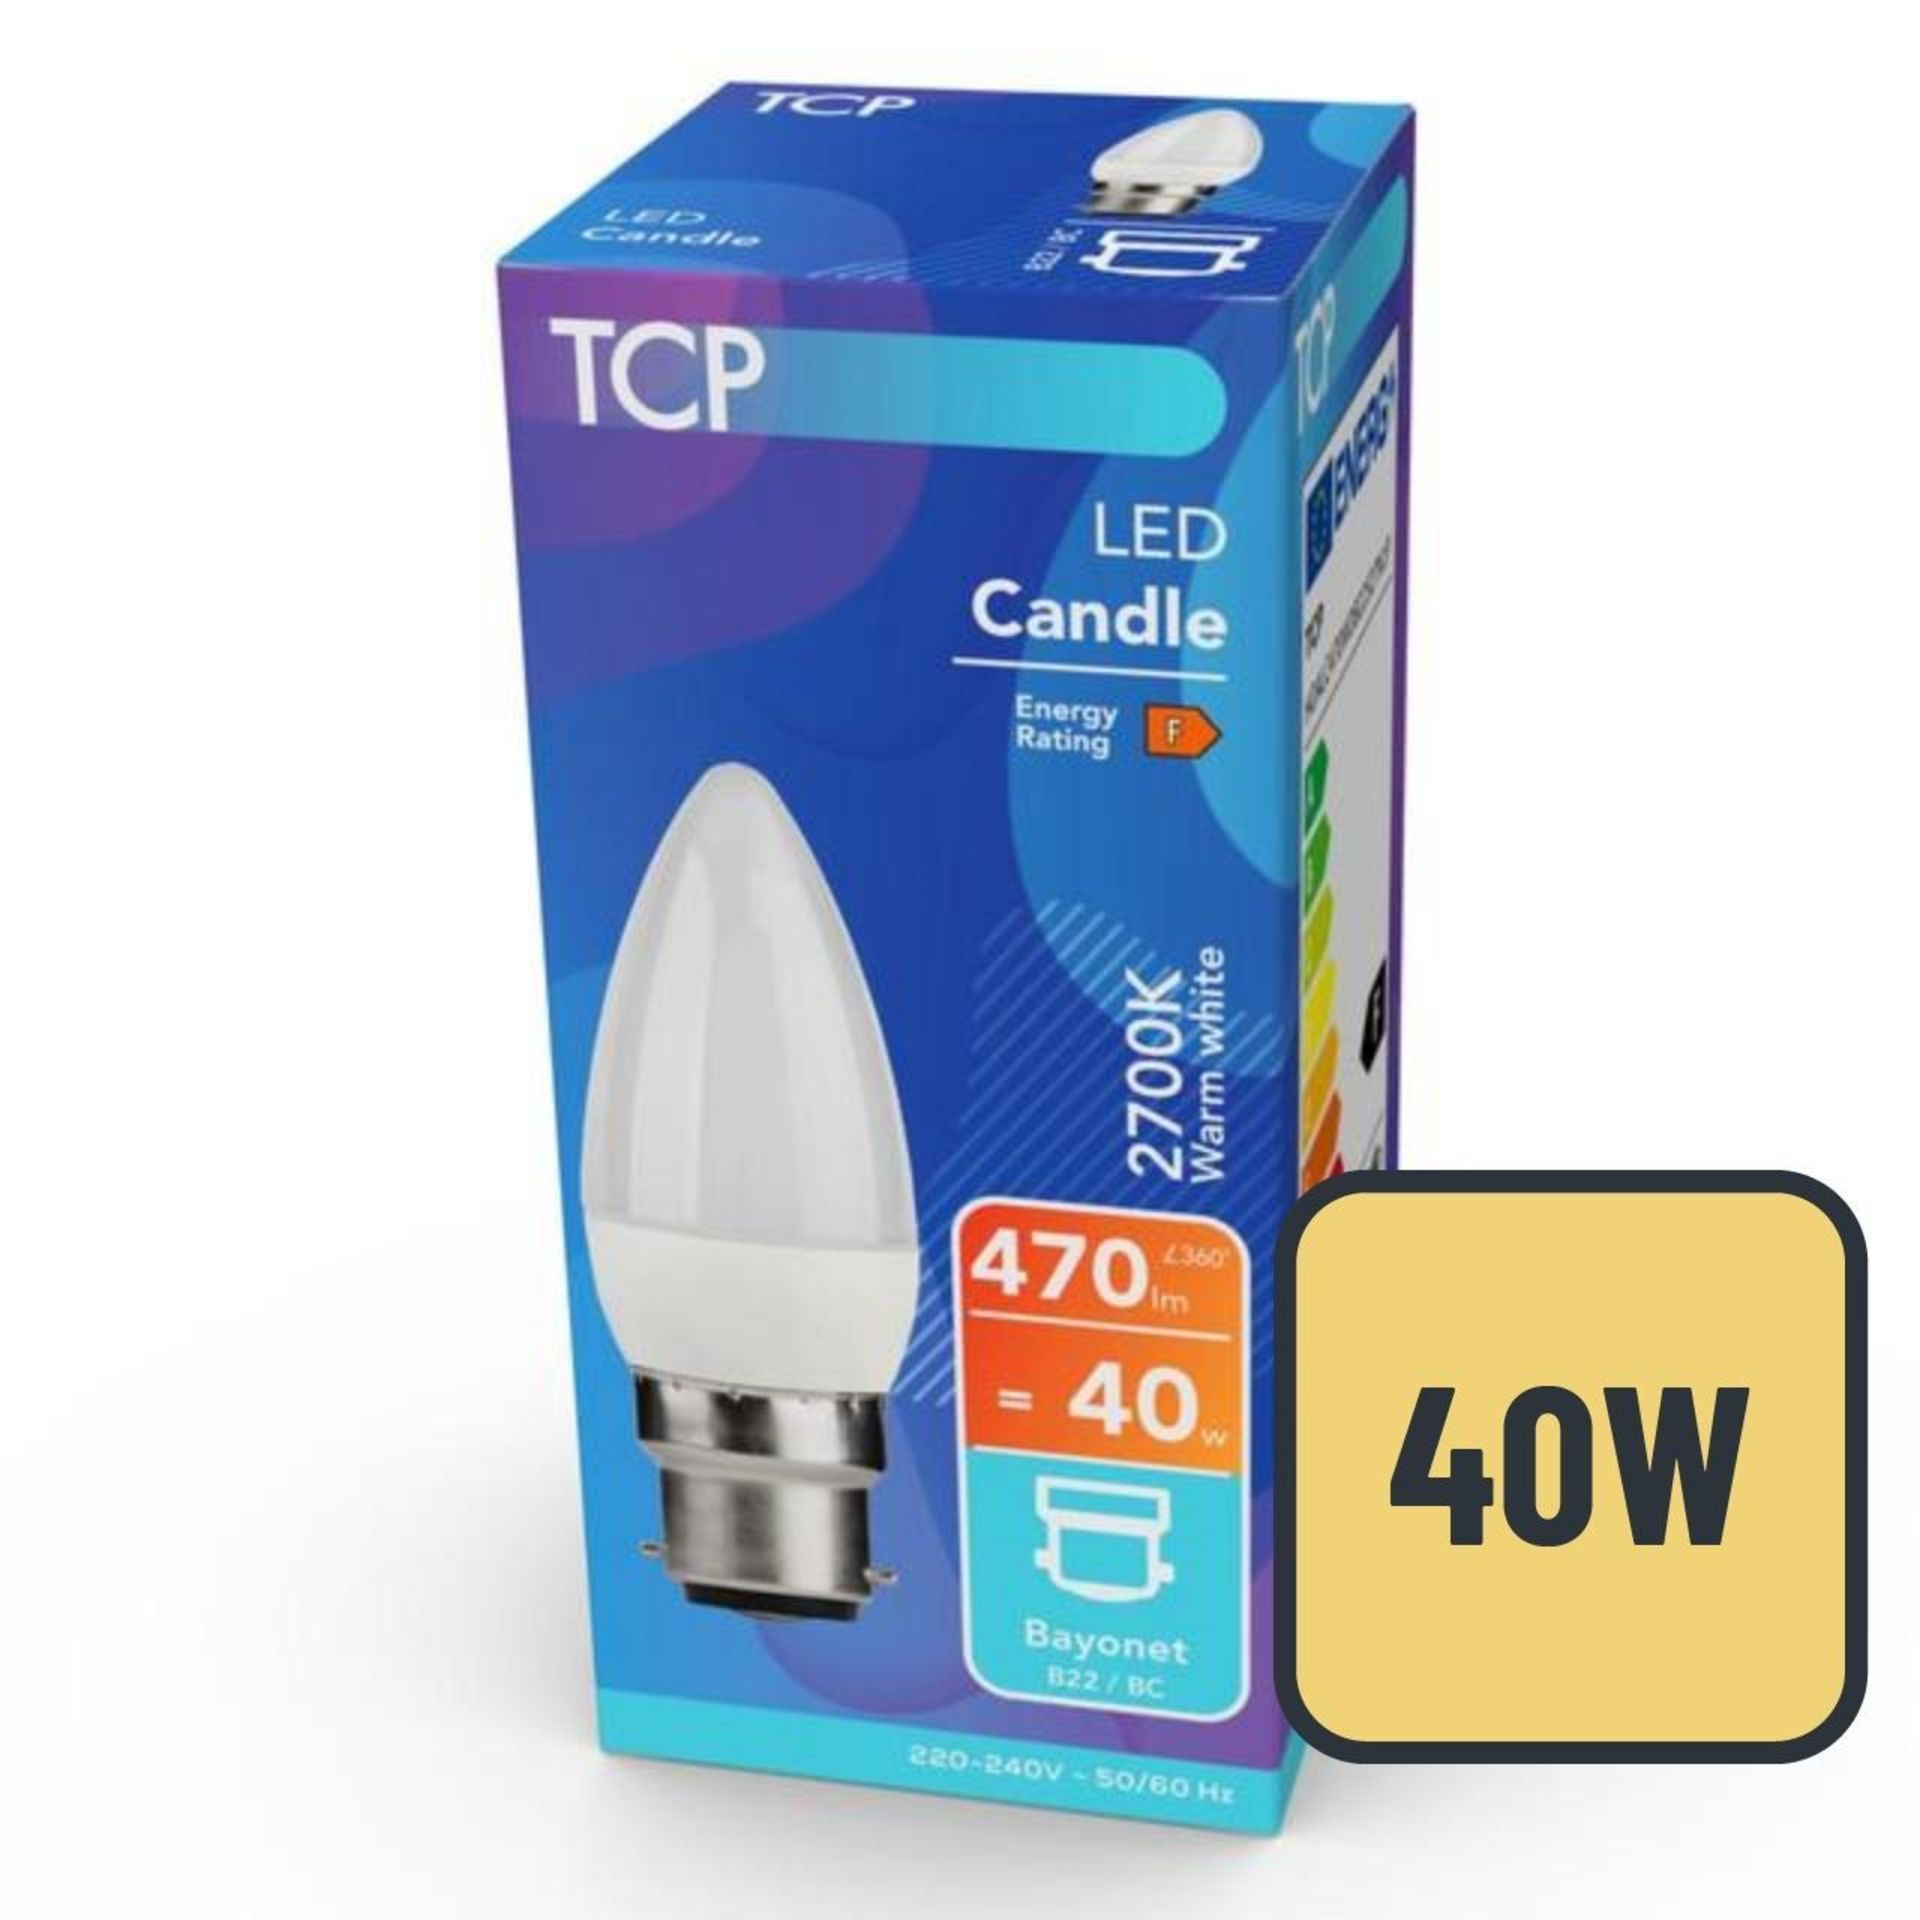 TRADE PALLET TO CONTAIN 2044x BRAND NEW TCP LED 470 Lumen Non-Dimmable 5.1w Coated B22 Candle